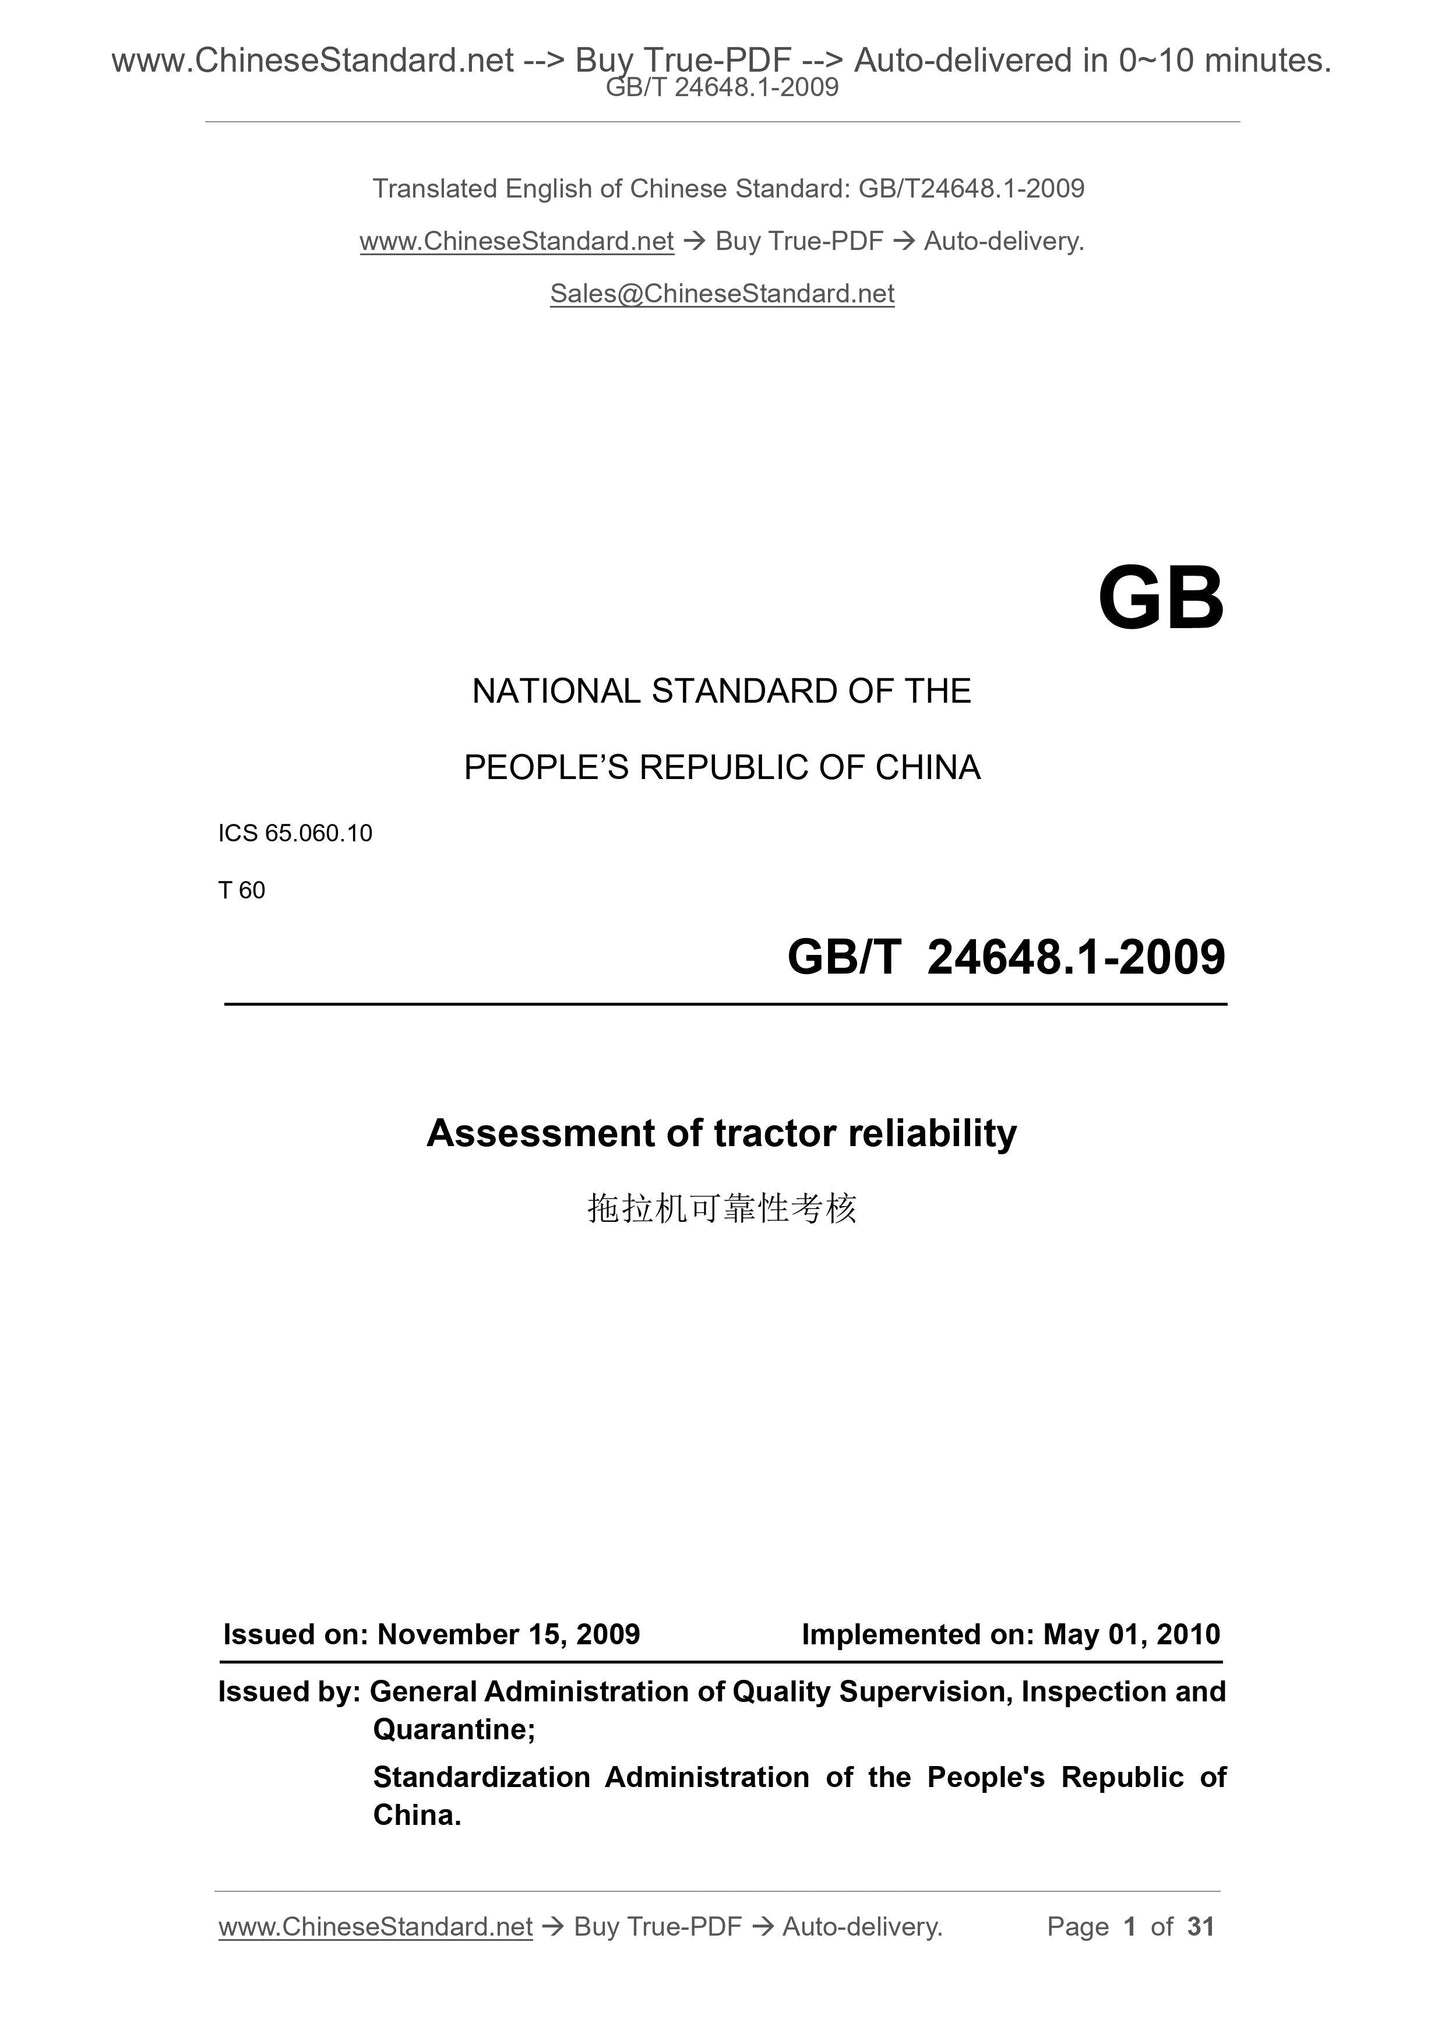 GB/T 24648.1-2009 Page 1